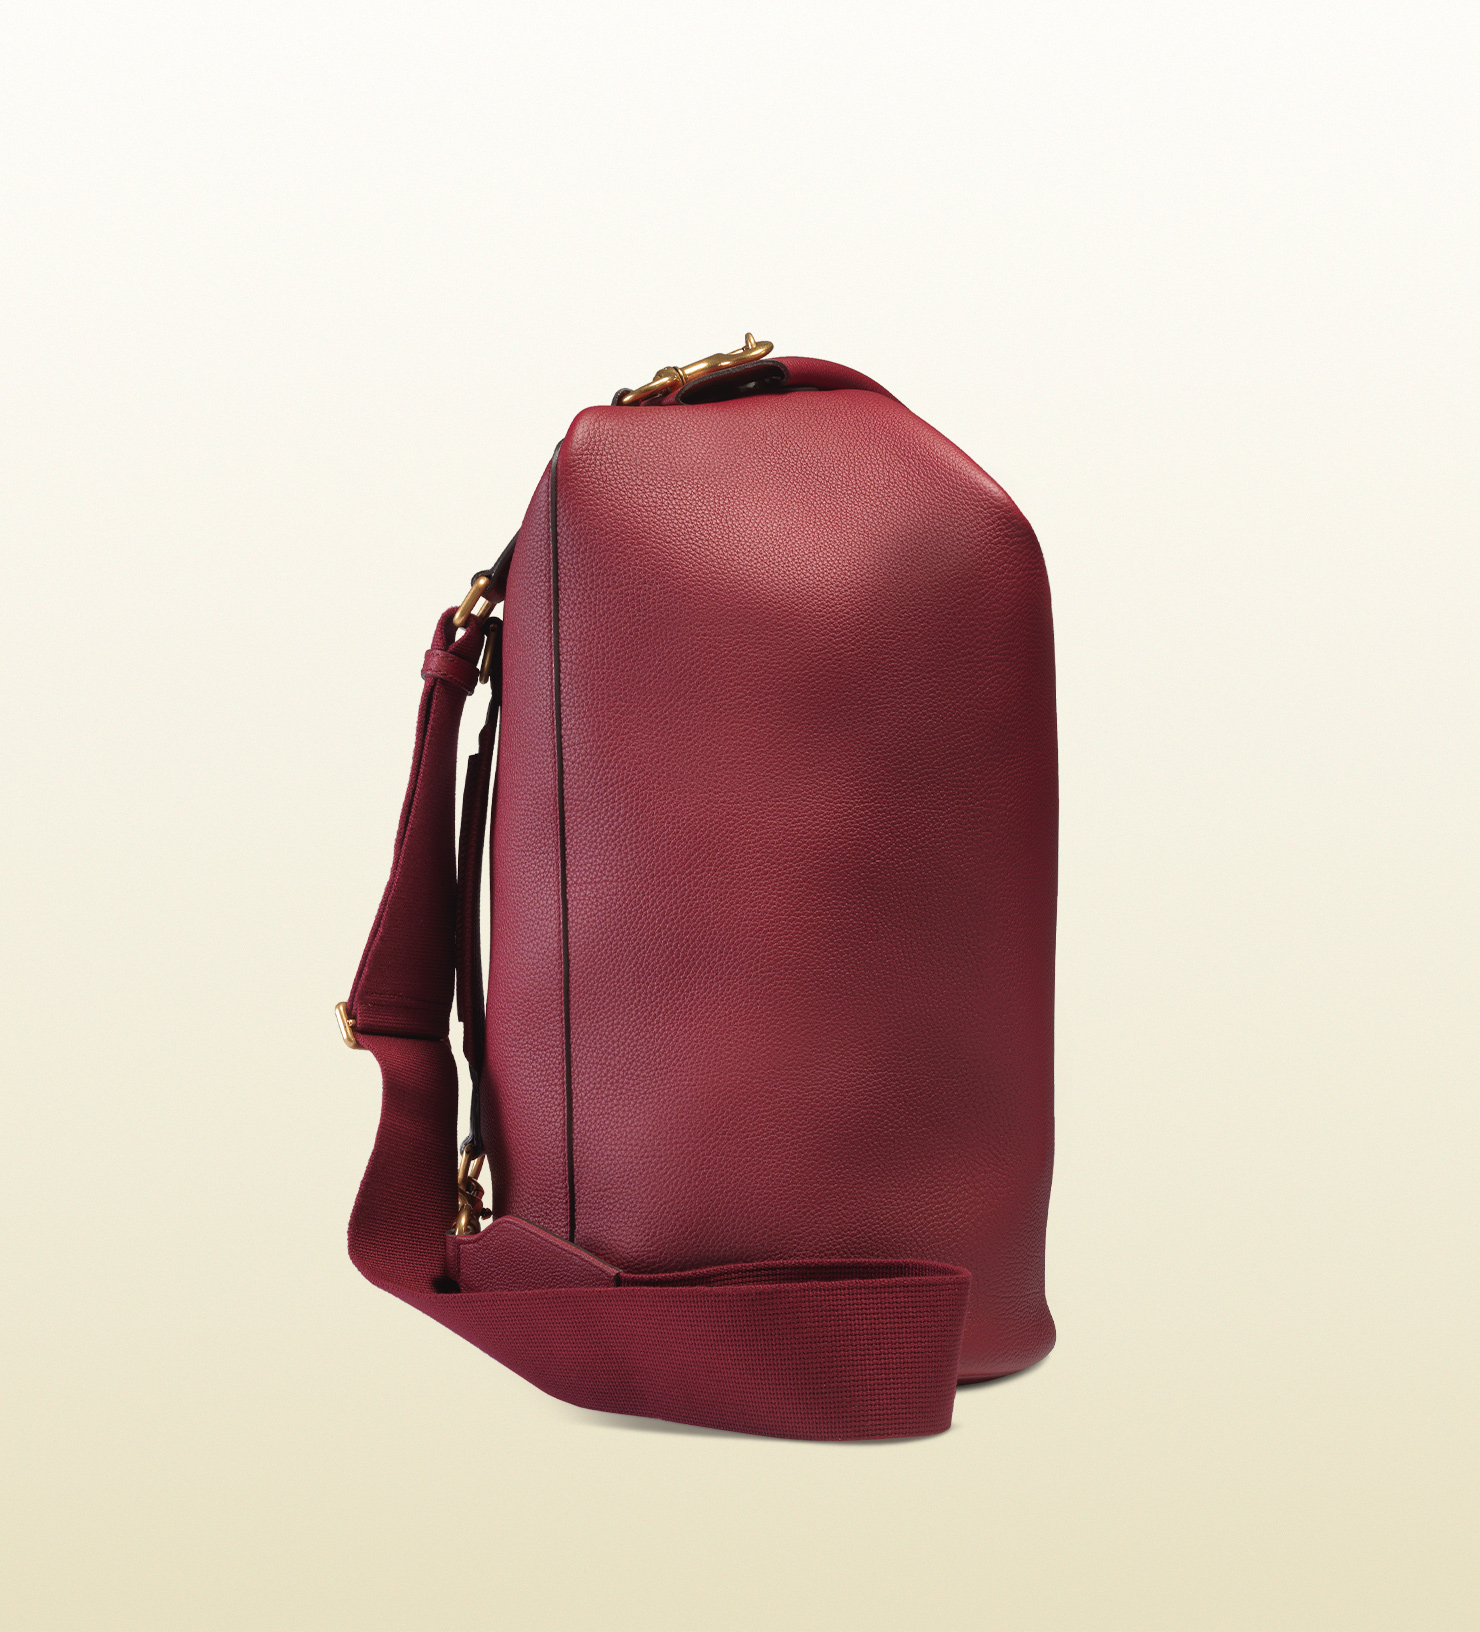 Gucci Leather Backpack in Red for Men - Lyst